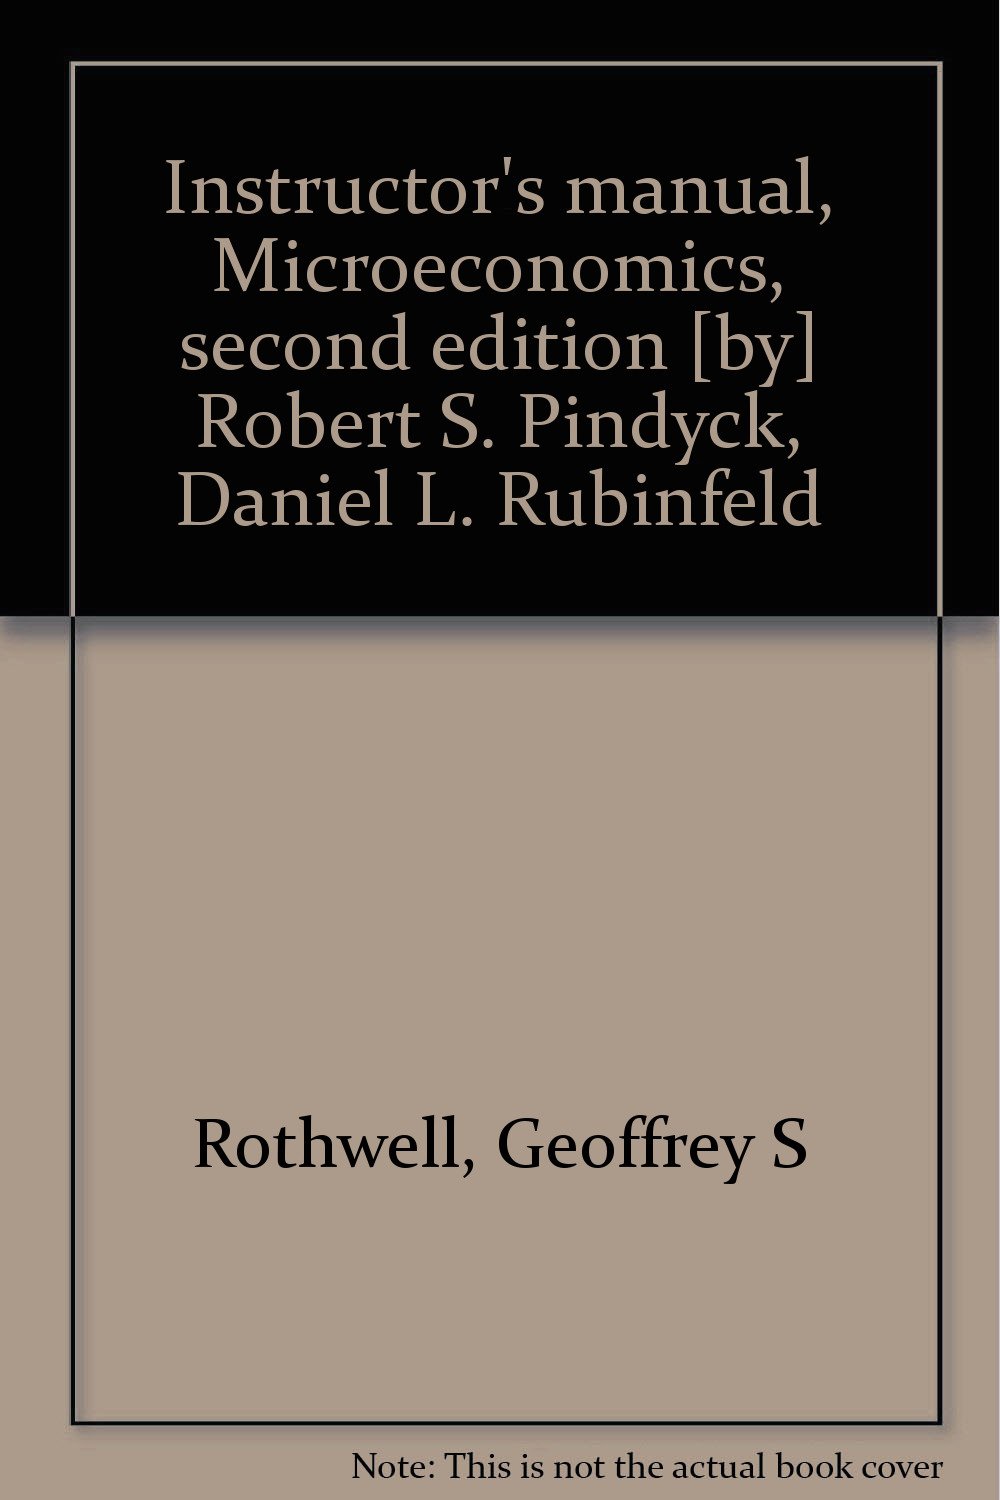 Book Cover Instructor's manual, Microeconomics, second edition [by] Robert S. Pindyck, Daniel L. Rubinfeld